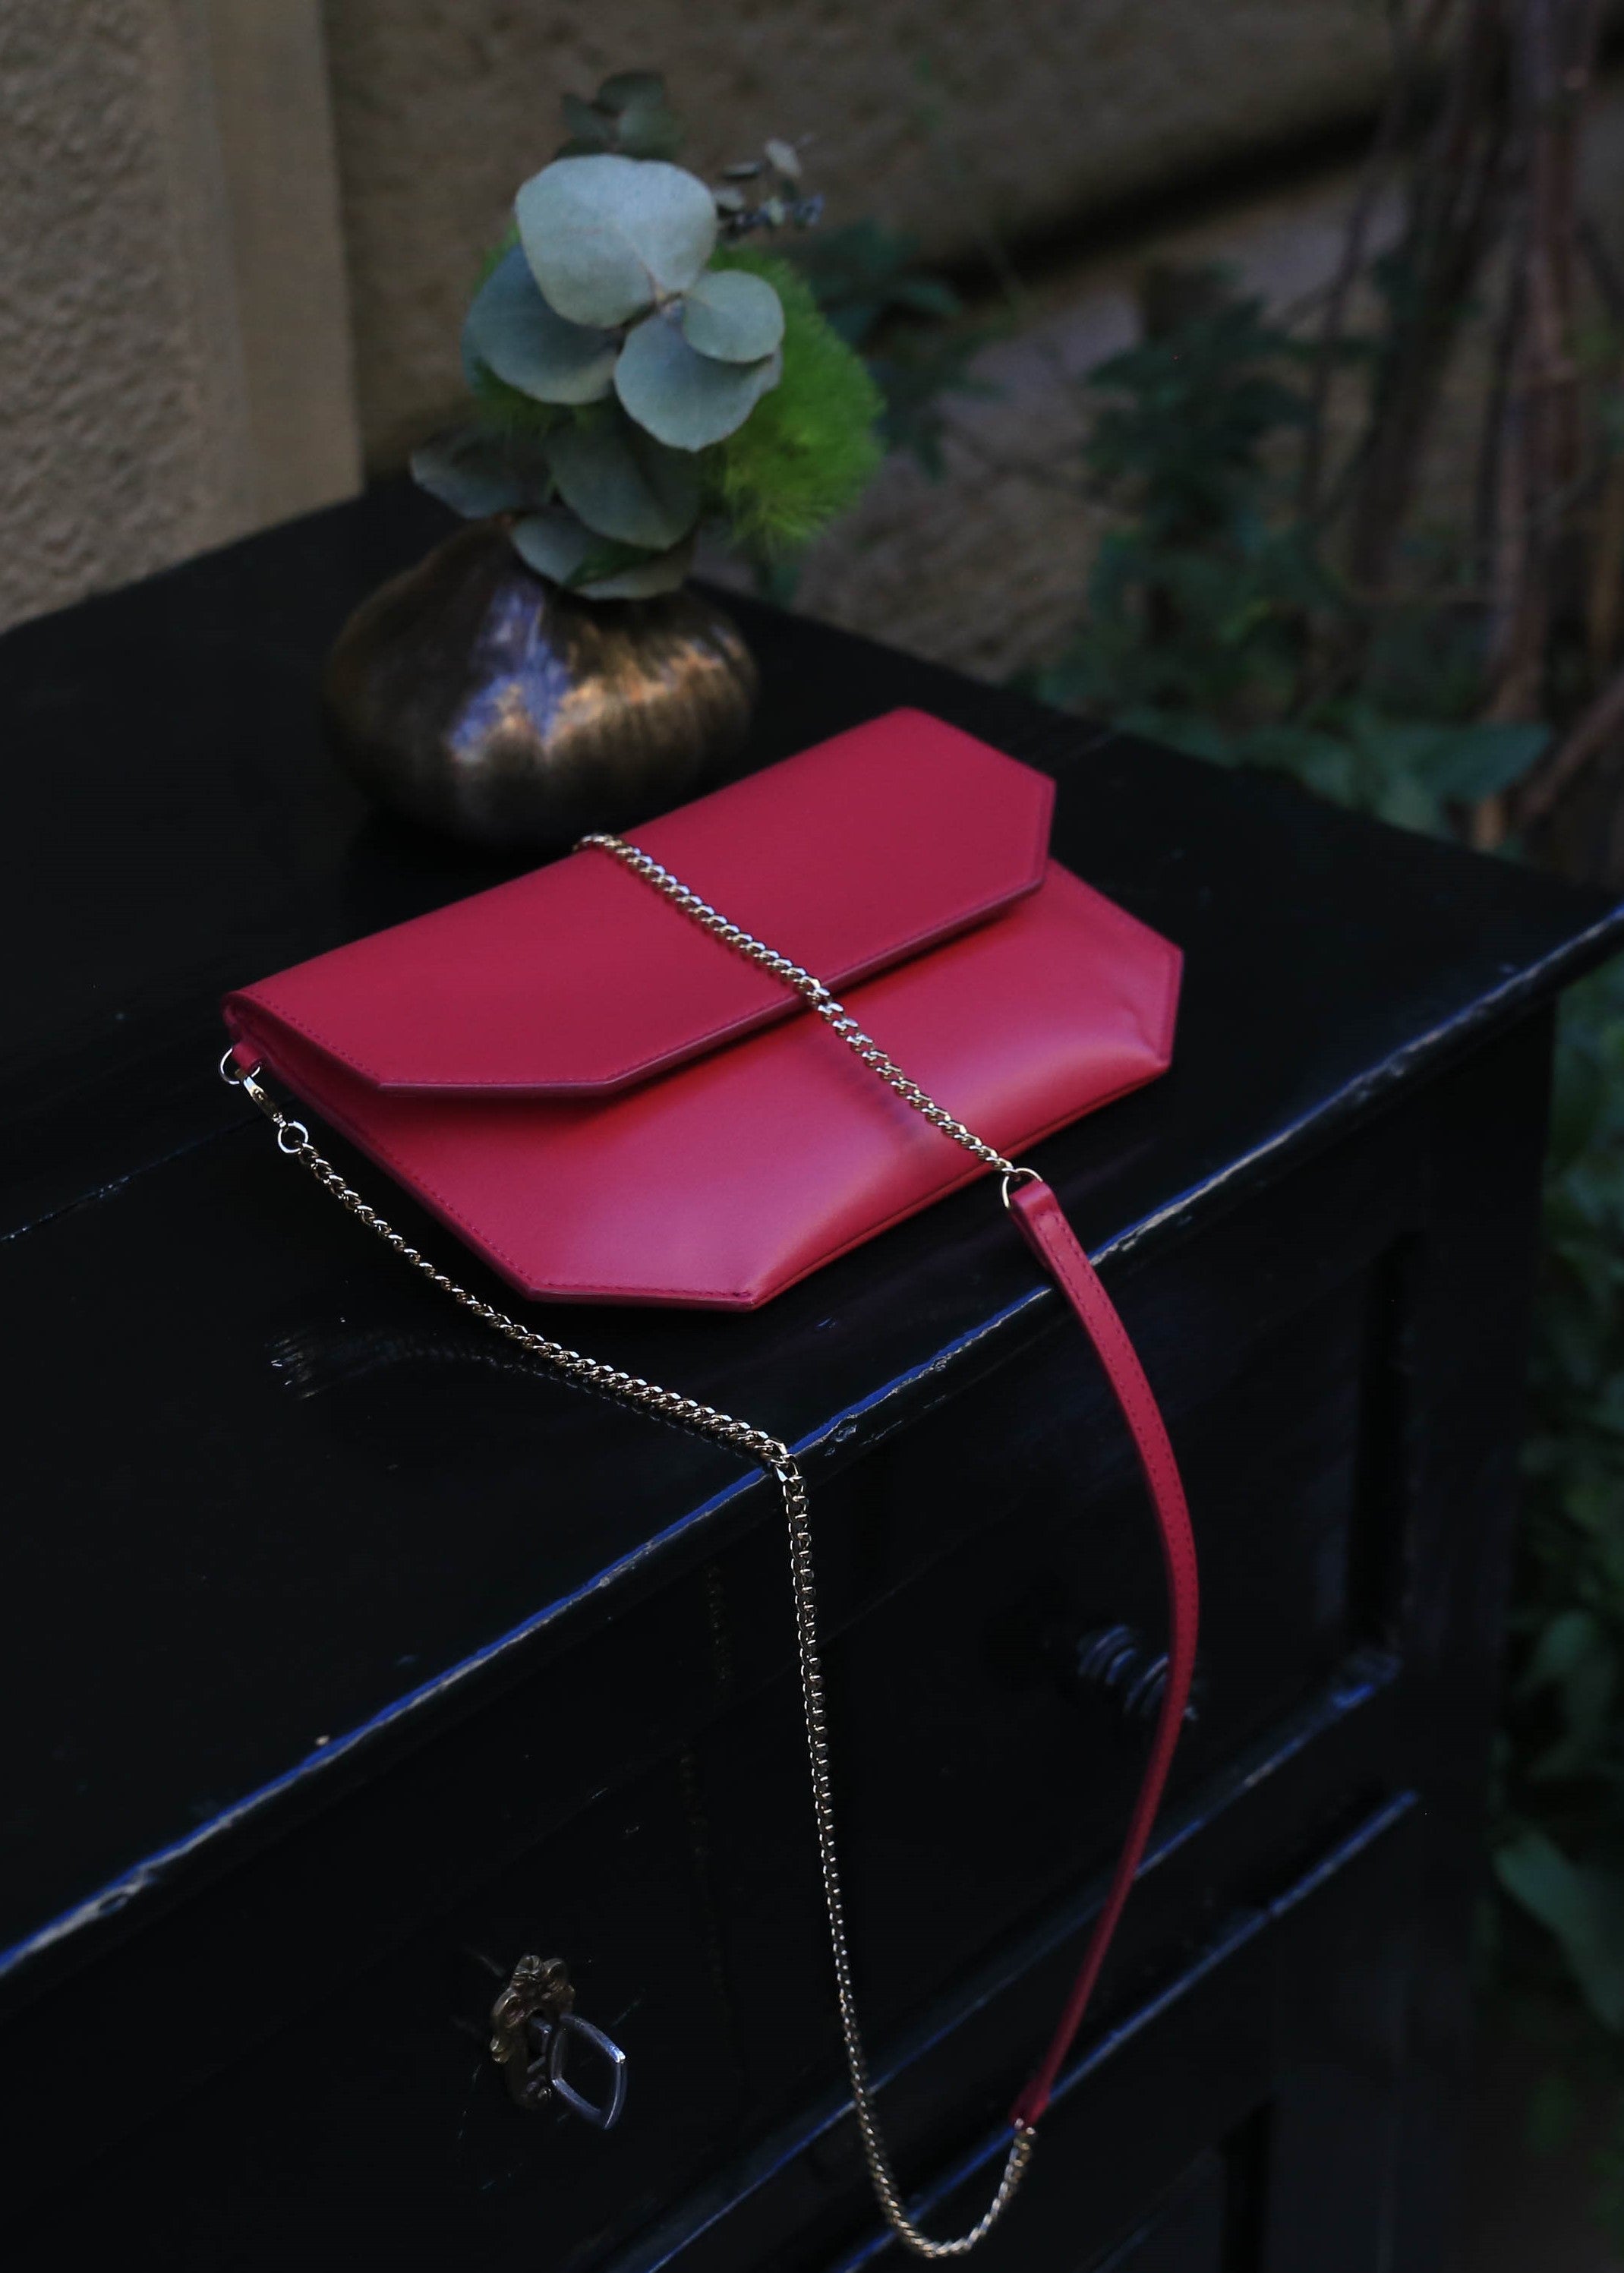 Chandra Keyser Fuchsia Bright Pink Crossbody Clutch Purse. Andiamo Purse. Sustainable Luxury Made in Italy. Sitting on a black wooden table.